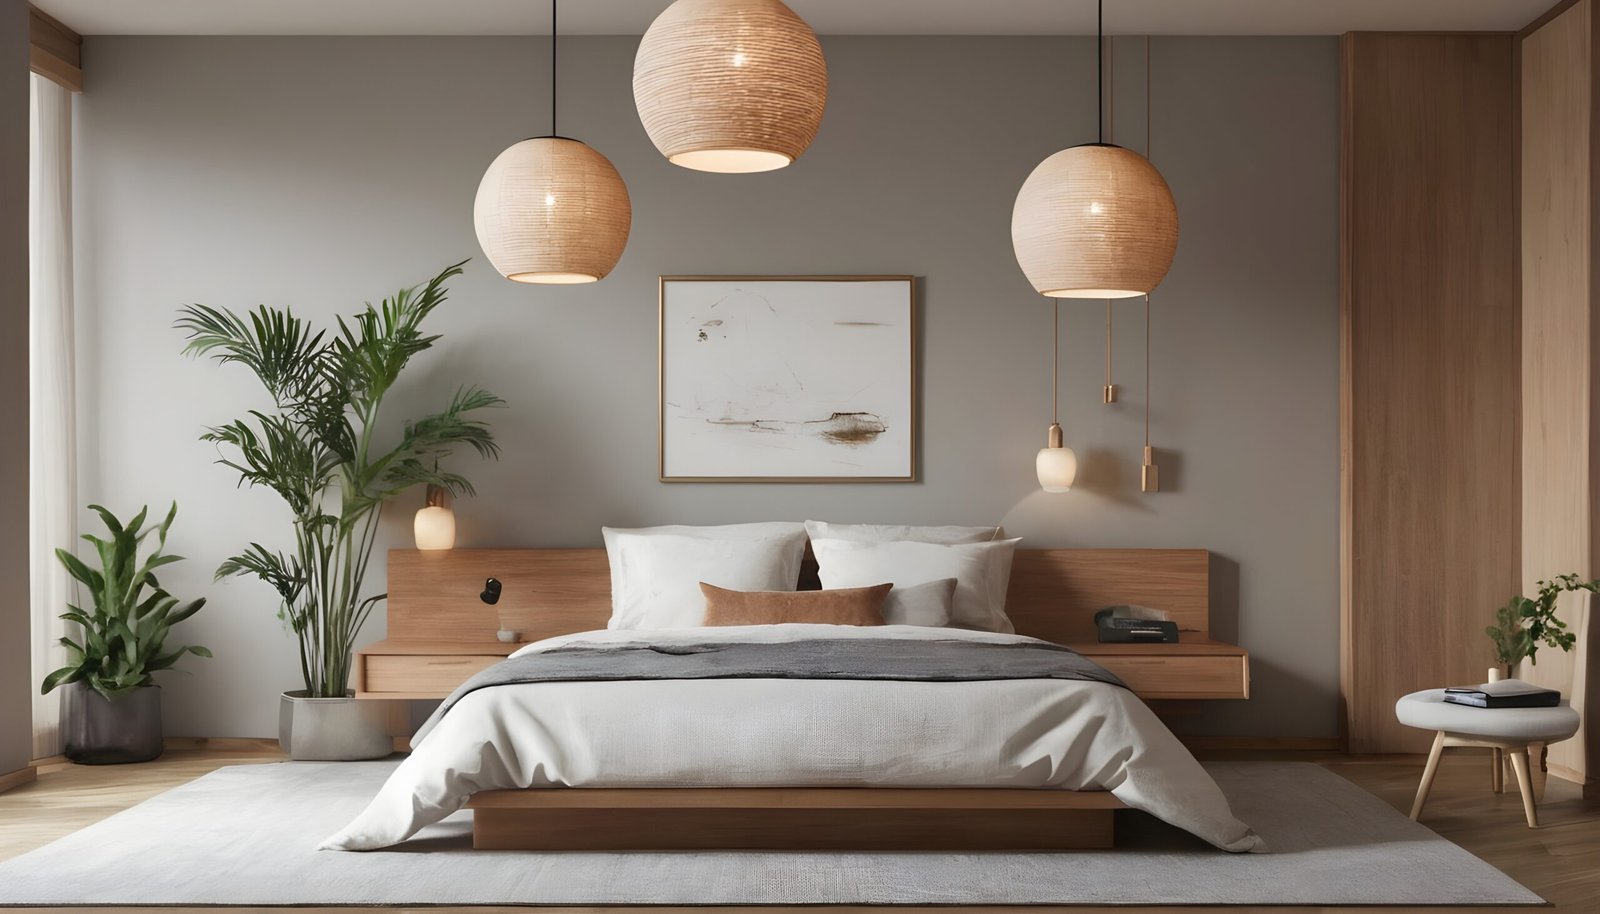 Typical japandi bedroom with staple pendant lights. 